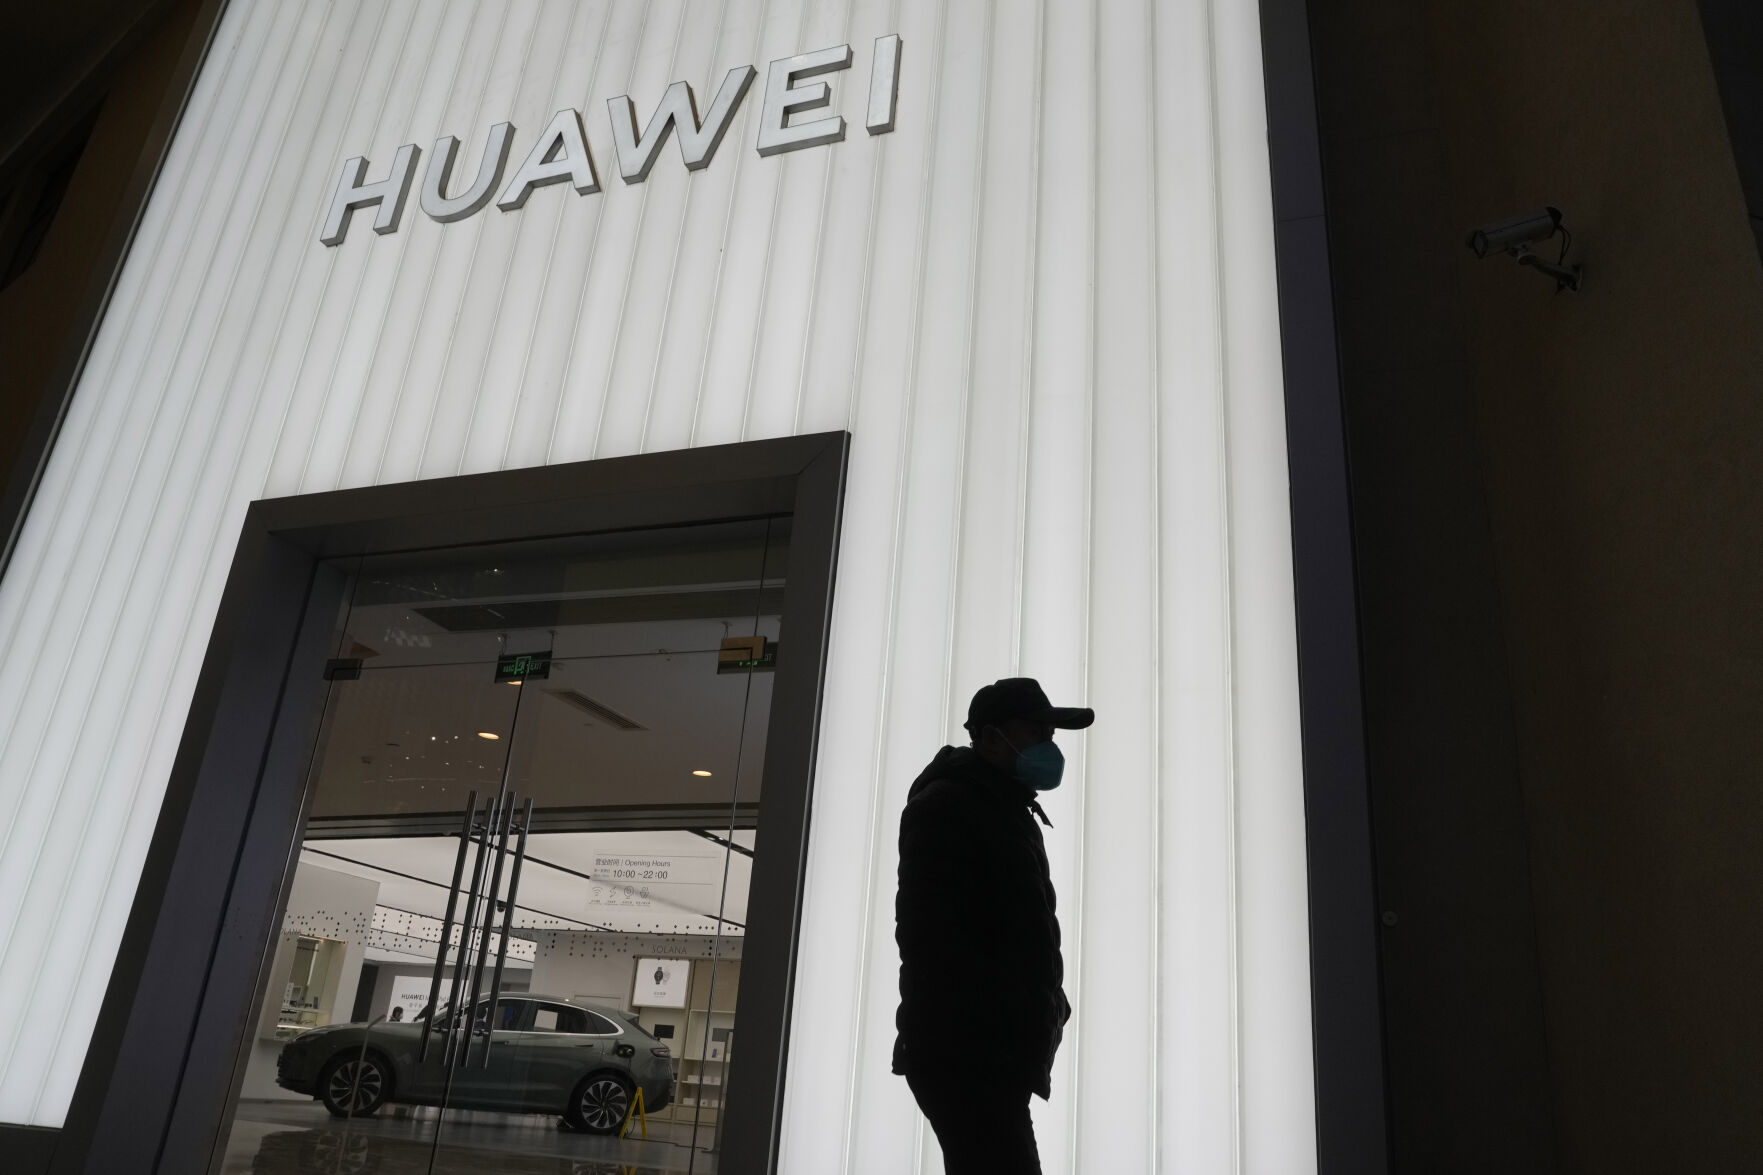 <p>A man is silhouetted outside a Huawei retail store in Beijing, Friday, Dec. 30, 2022. Chinese technology giant Huawei says it has pulled itself out of "crisis mode" following years of U.S. restrictions that have stifled its sales in overseas markets, though its revenue for 2022 did not grow from a year earlier. (AP Photo/Ng Han Guan)</p>   PHOTO CREDIT: Ng Han Guan - staff, AP